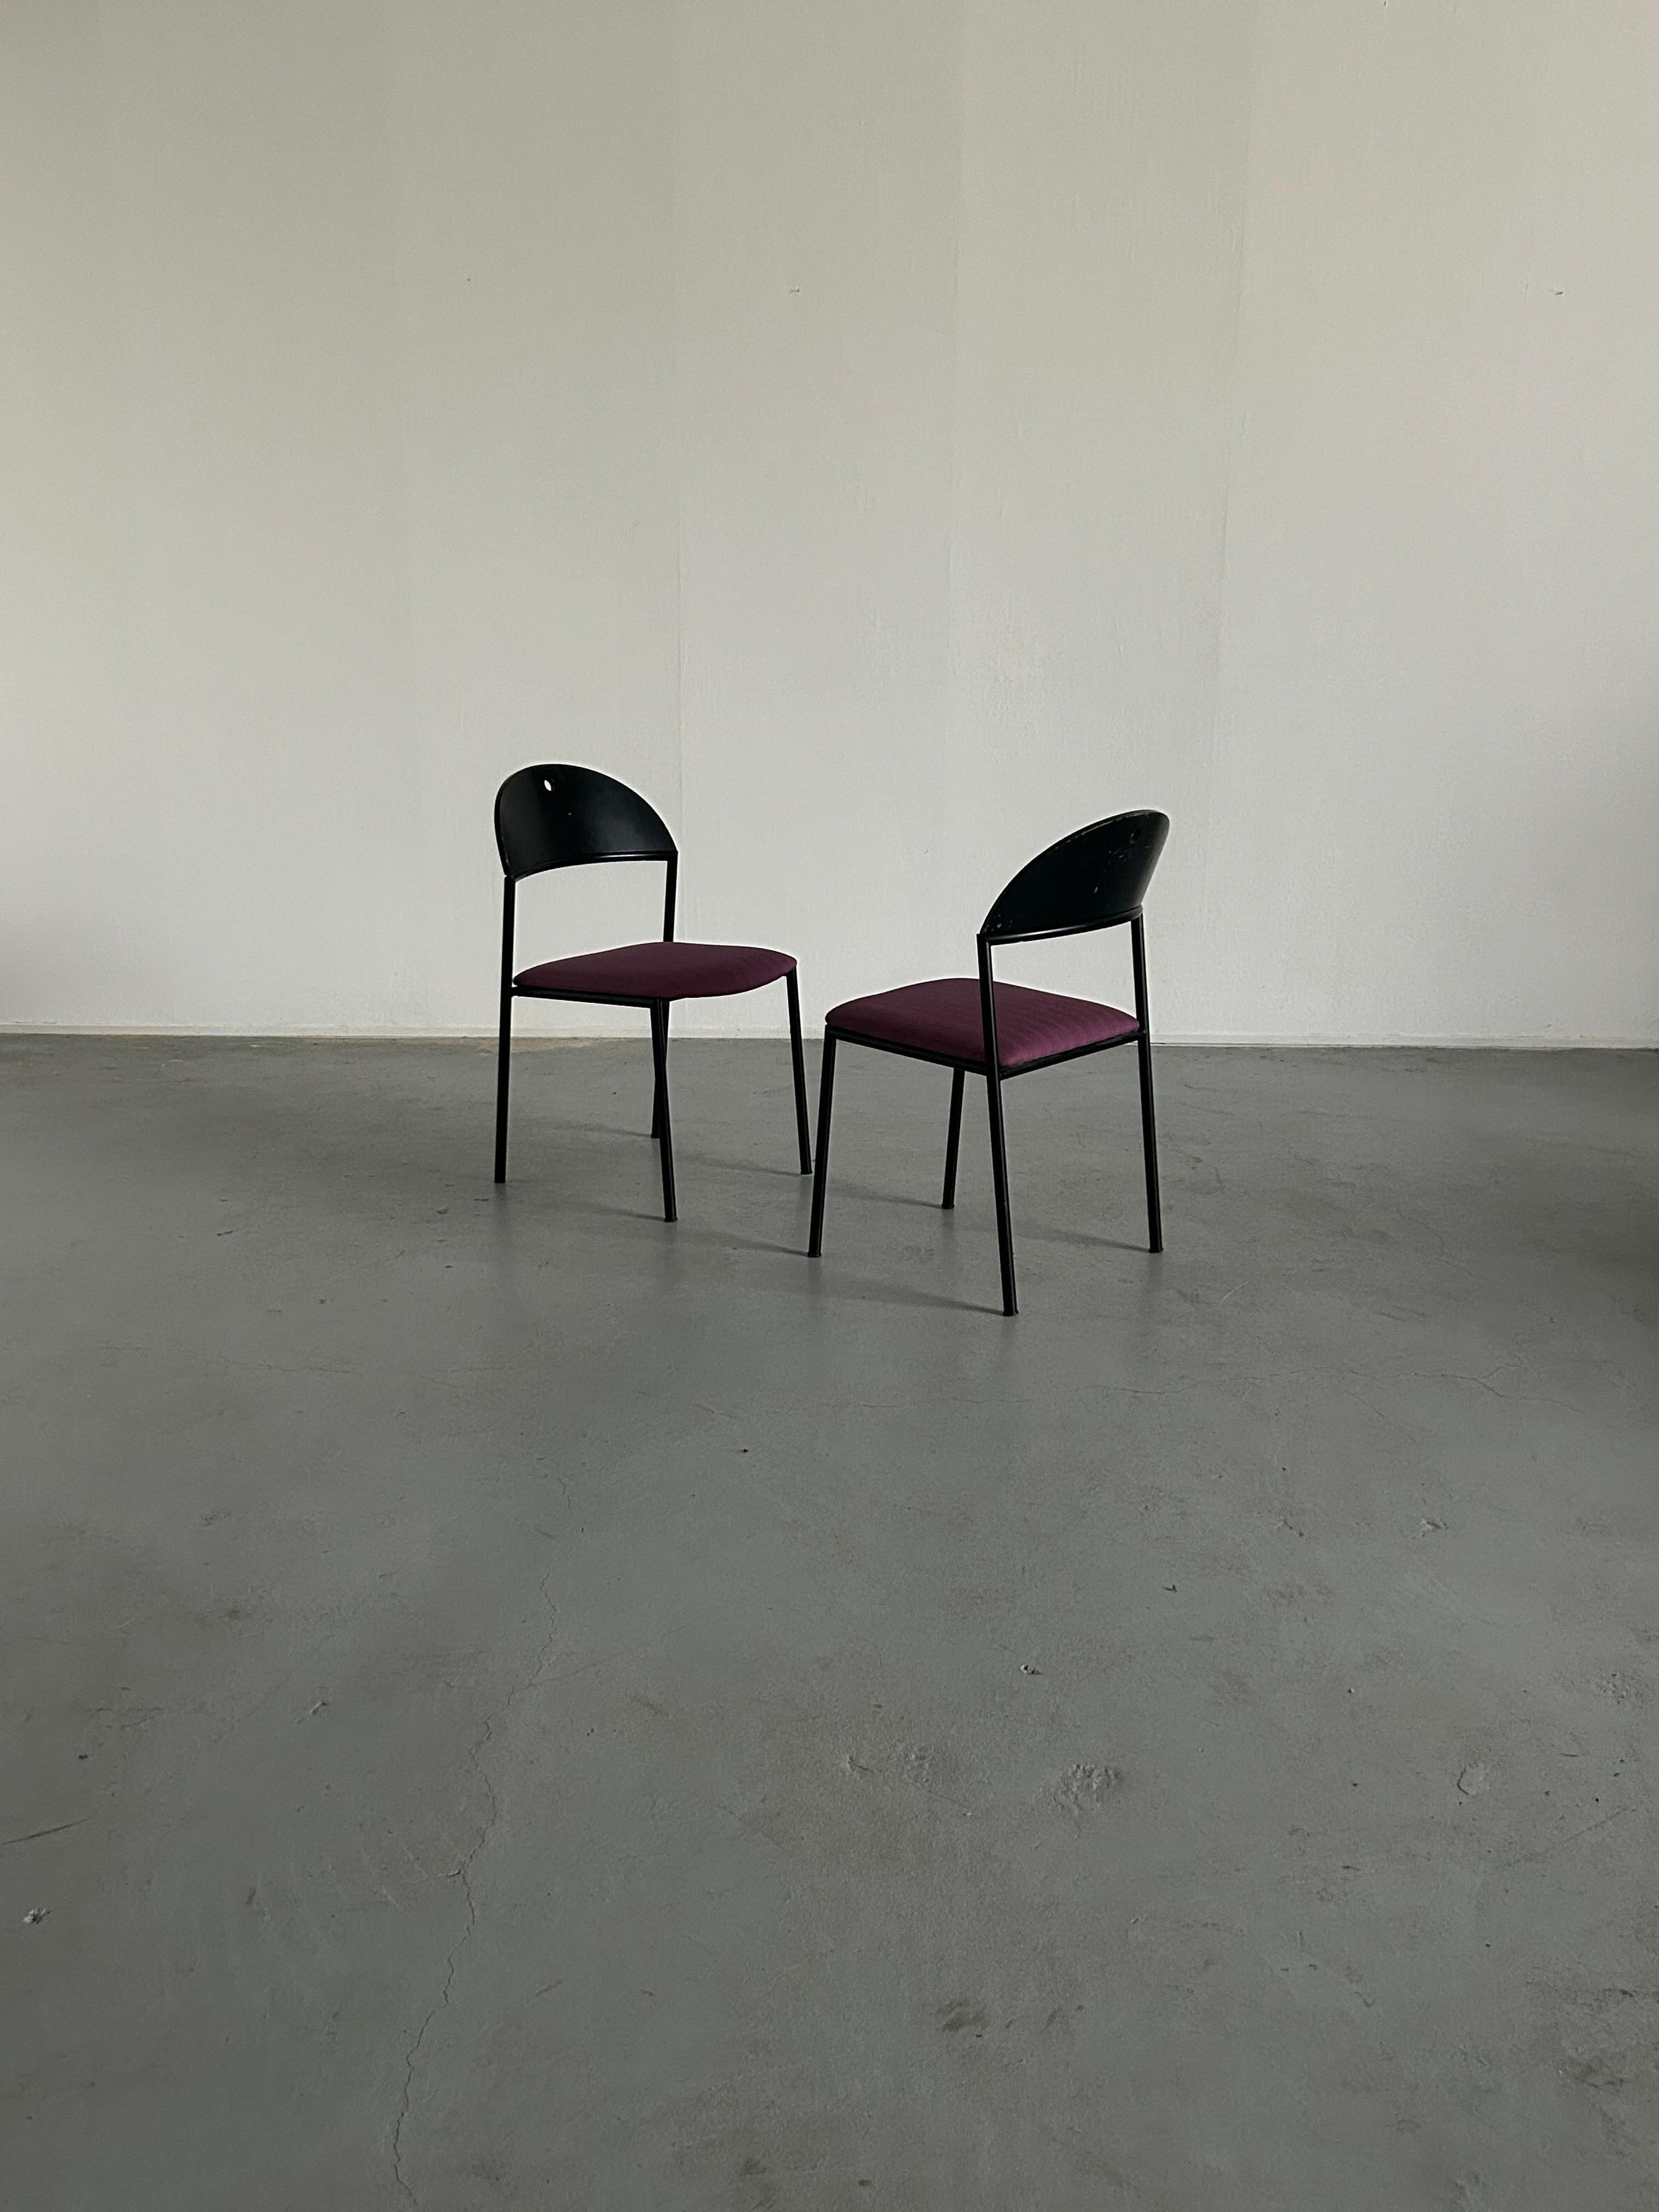 Memphis style postmodernist dining or visitor armchairs produced by the popular Austrian furniture company Wiesner Hager, during the 1990s.
A quality and sturdy production.
New striped purple upholstery.

In good vintage condition with expected